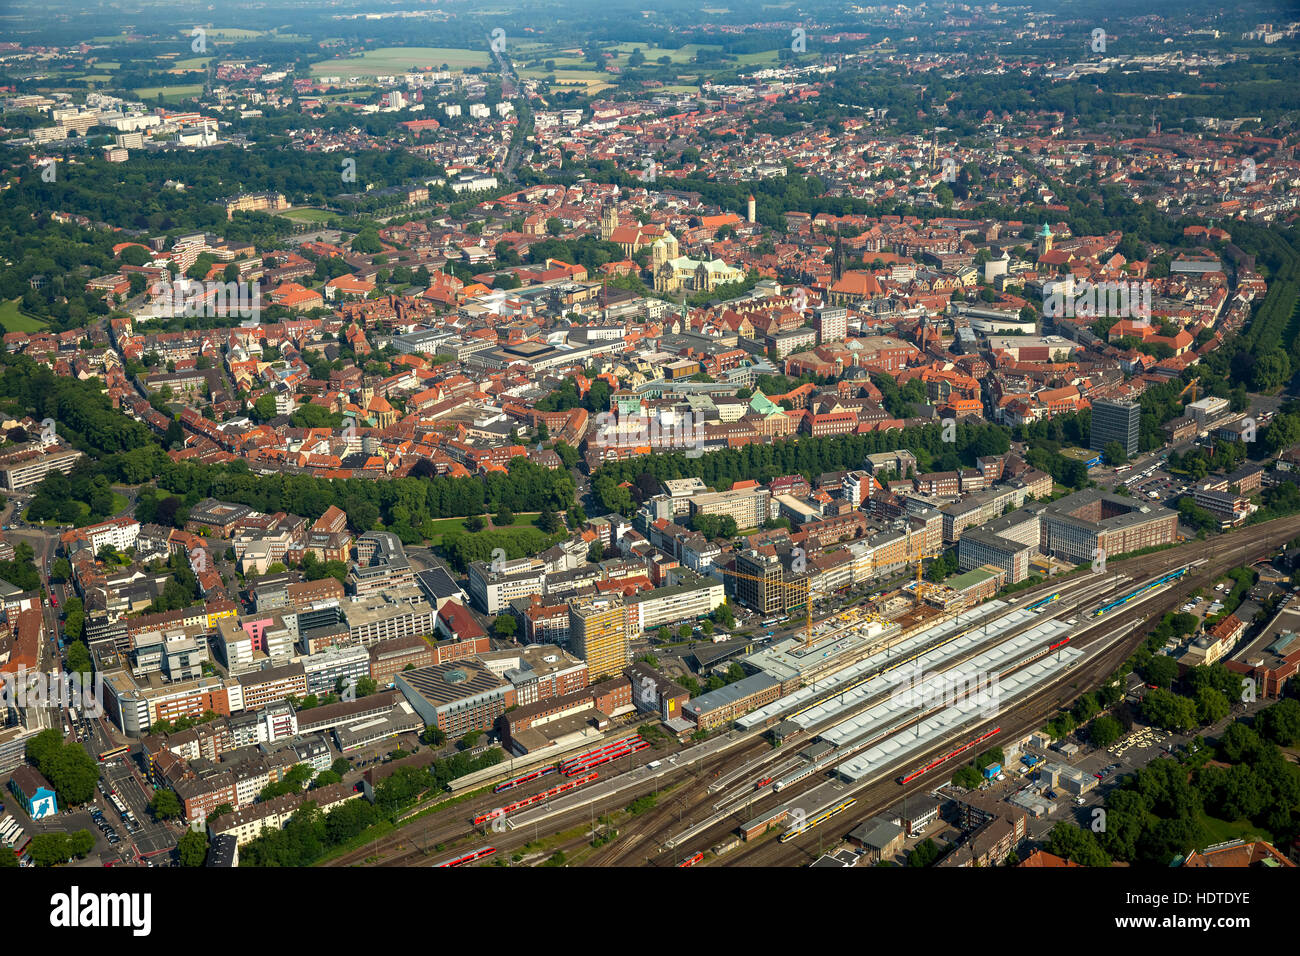 Aerial photograph, central station and historic centre, Münster, Münsterland, North Rhine-Westphalia, Germany Stock Photo